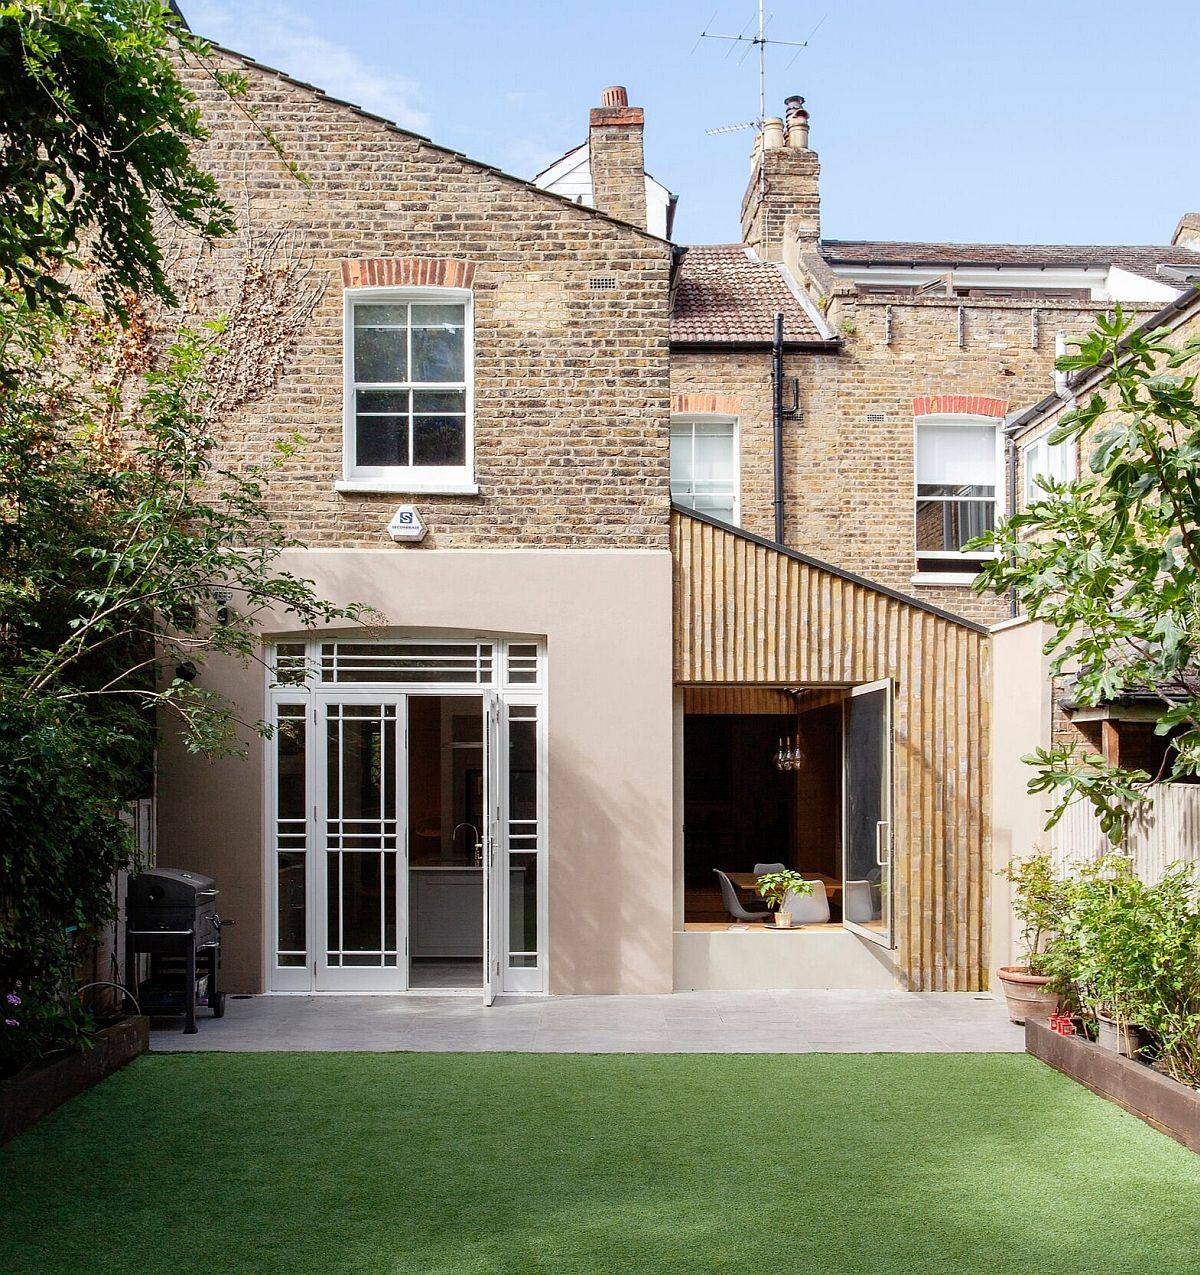 Gorgeous-and-functional-Slated-extension-in-Whitehall-Park-Conservation-Area-in-Islington-connects-the-new-kitchen-and-family-area-with-the-outdoors-79296